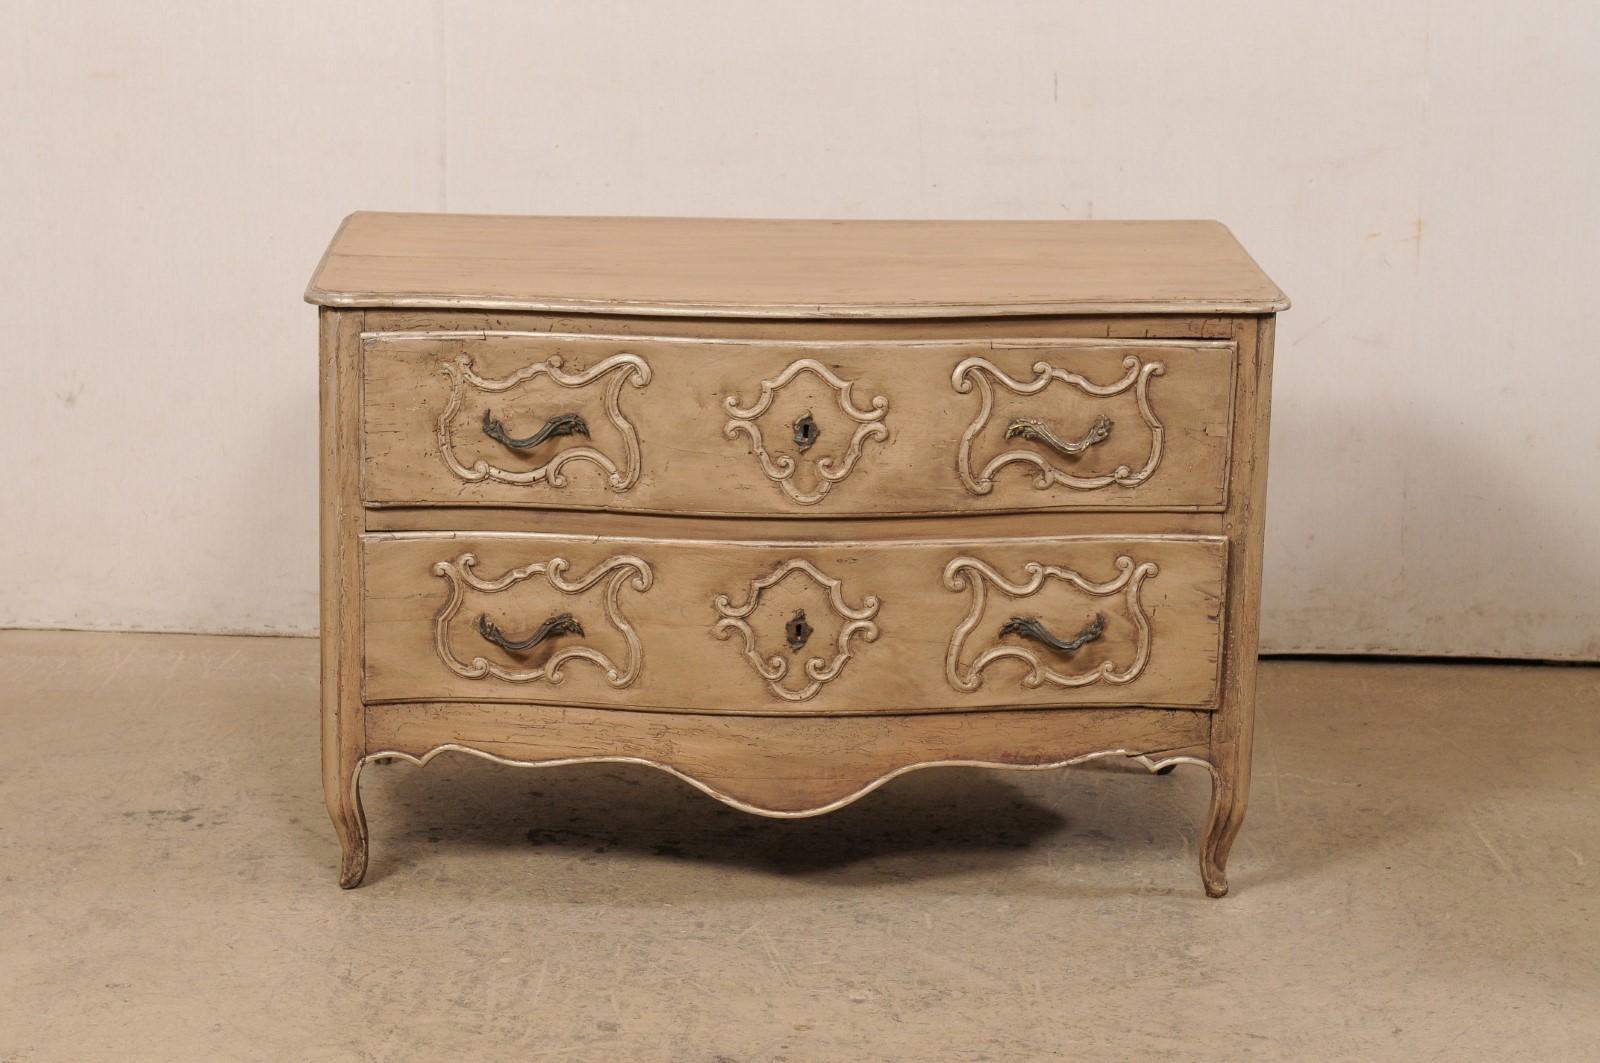 Late 18th C. Italian Serpentine Carved-Wood Chest For Sale 8